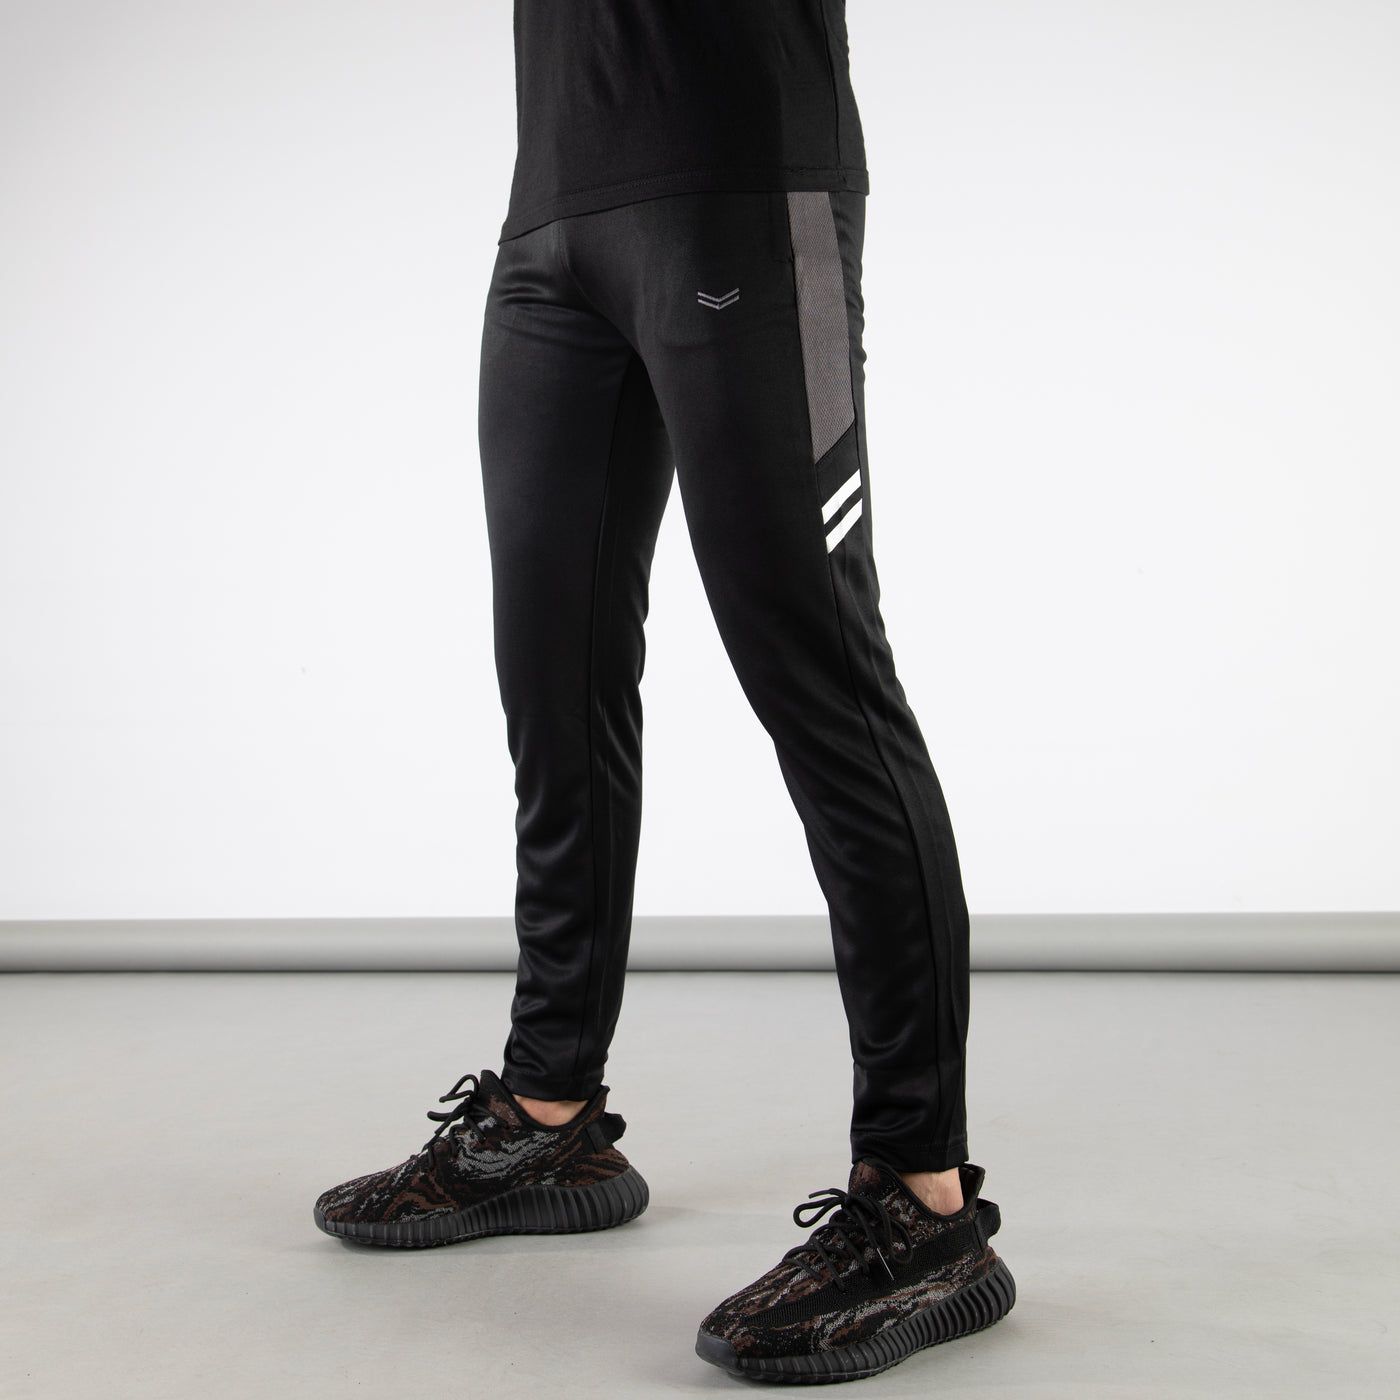 Black Quick Dry Hybrid Bottoms with Short Gray Mesh Panels & Two Stripes